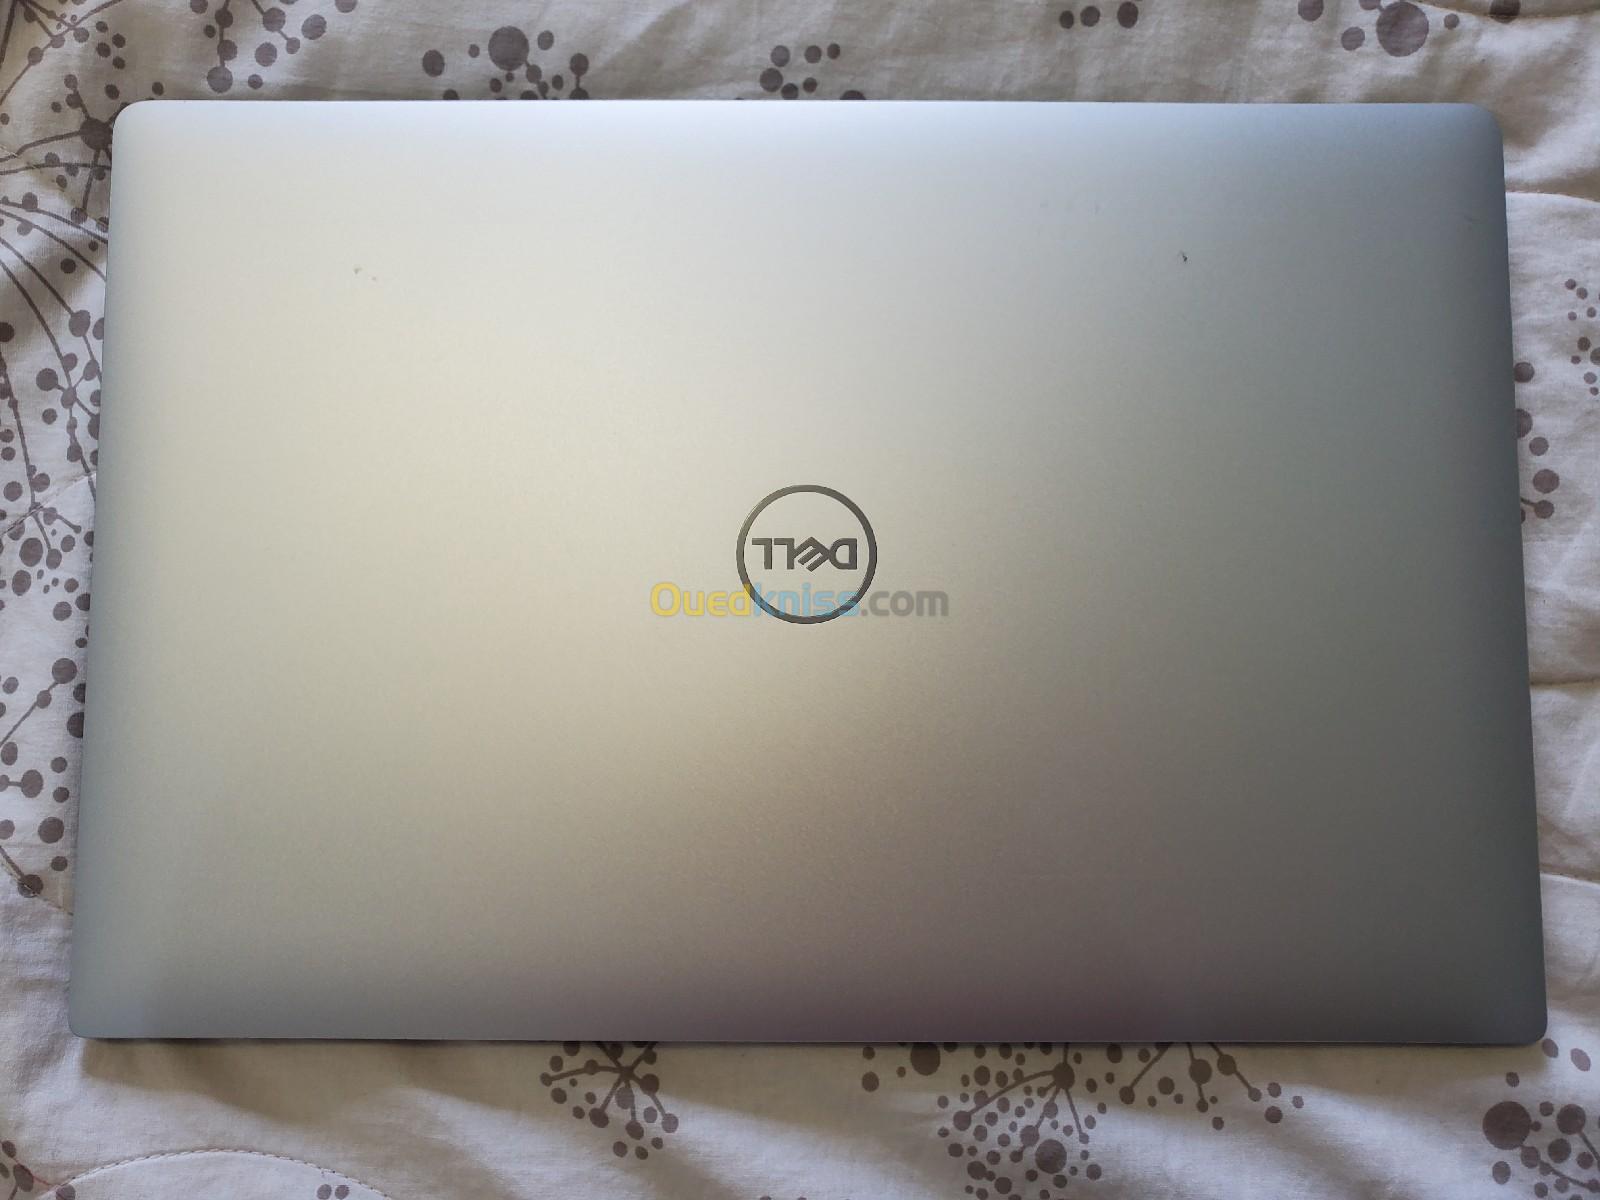 Dell xps 15 , 9570 , i7, 1 TO ssd, 16 go RAM